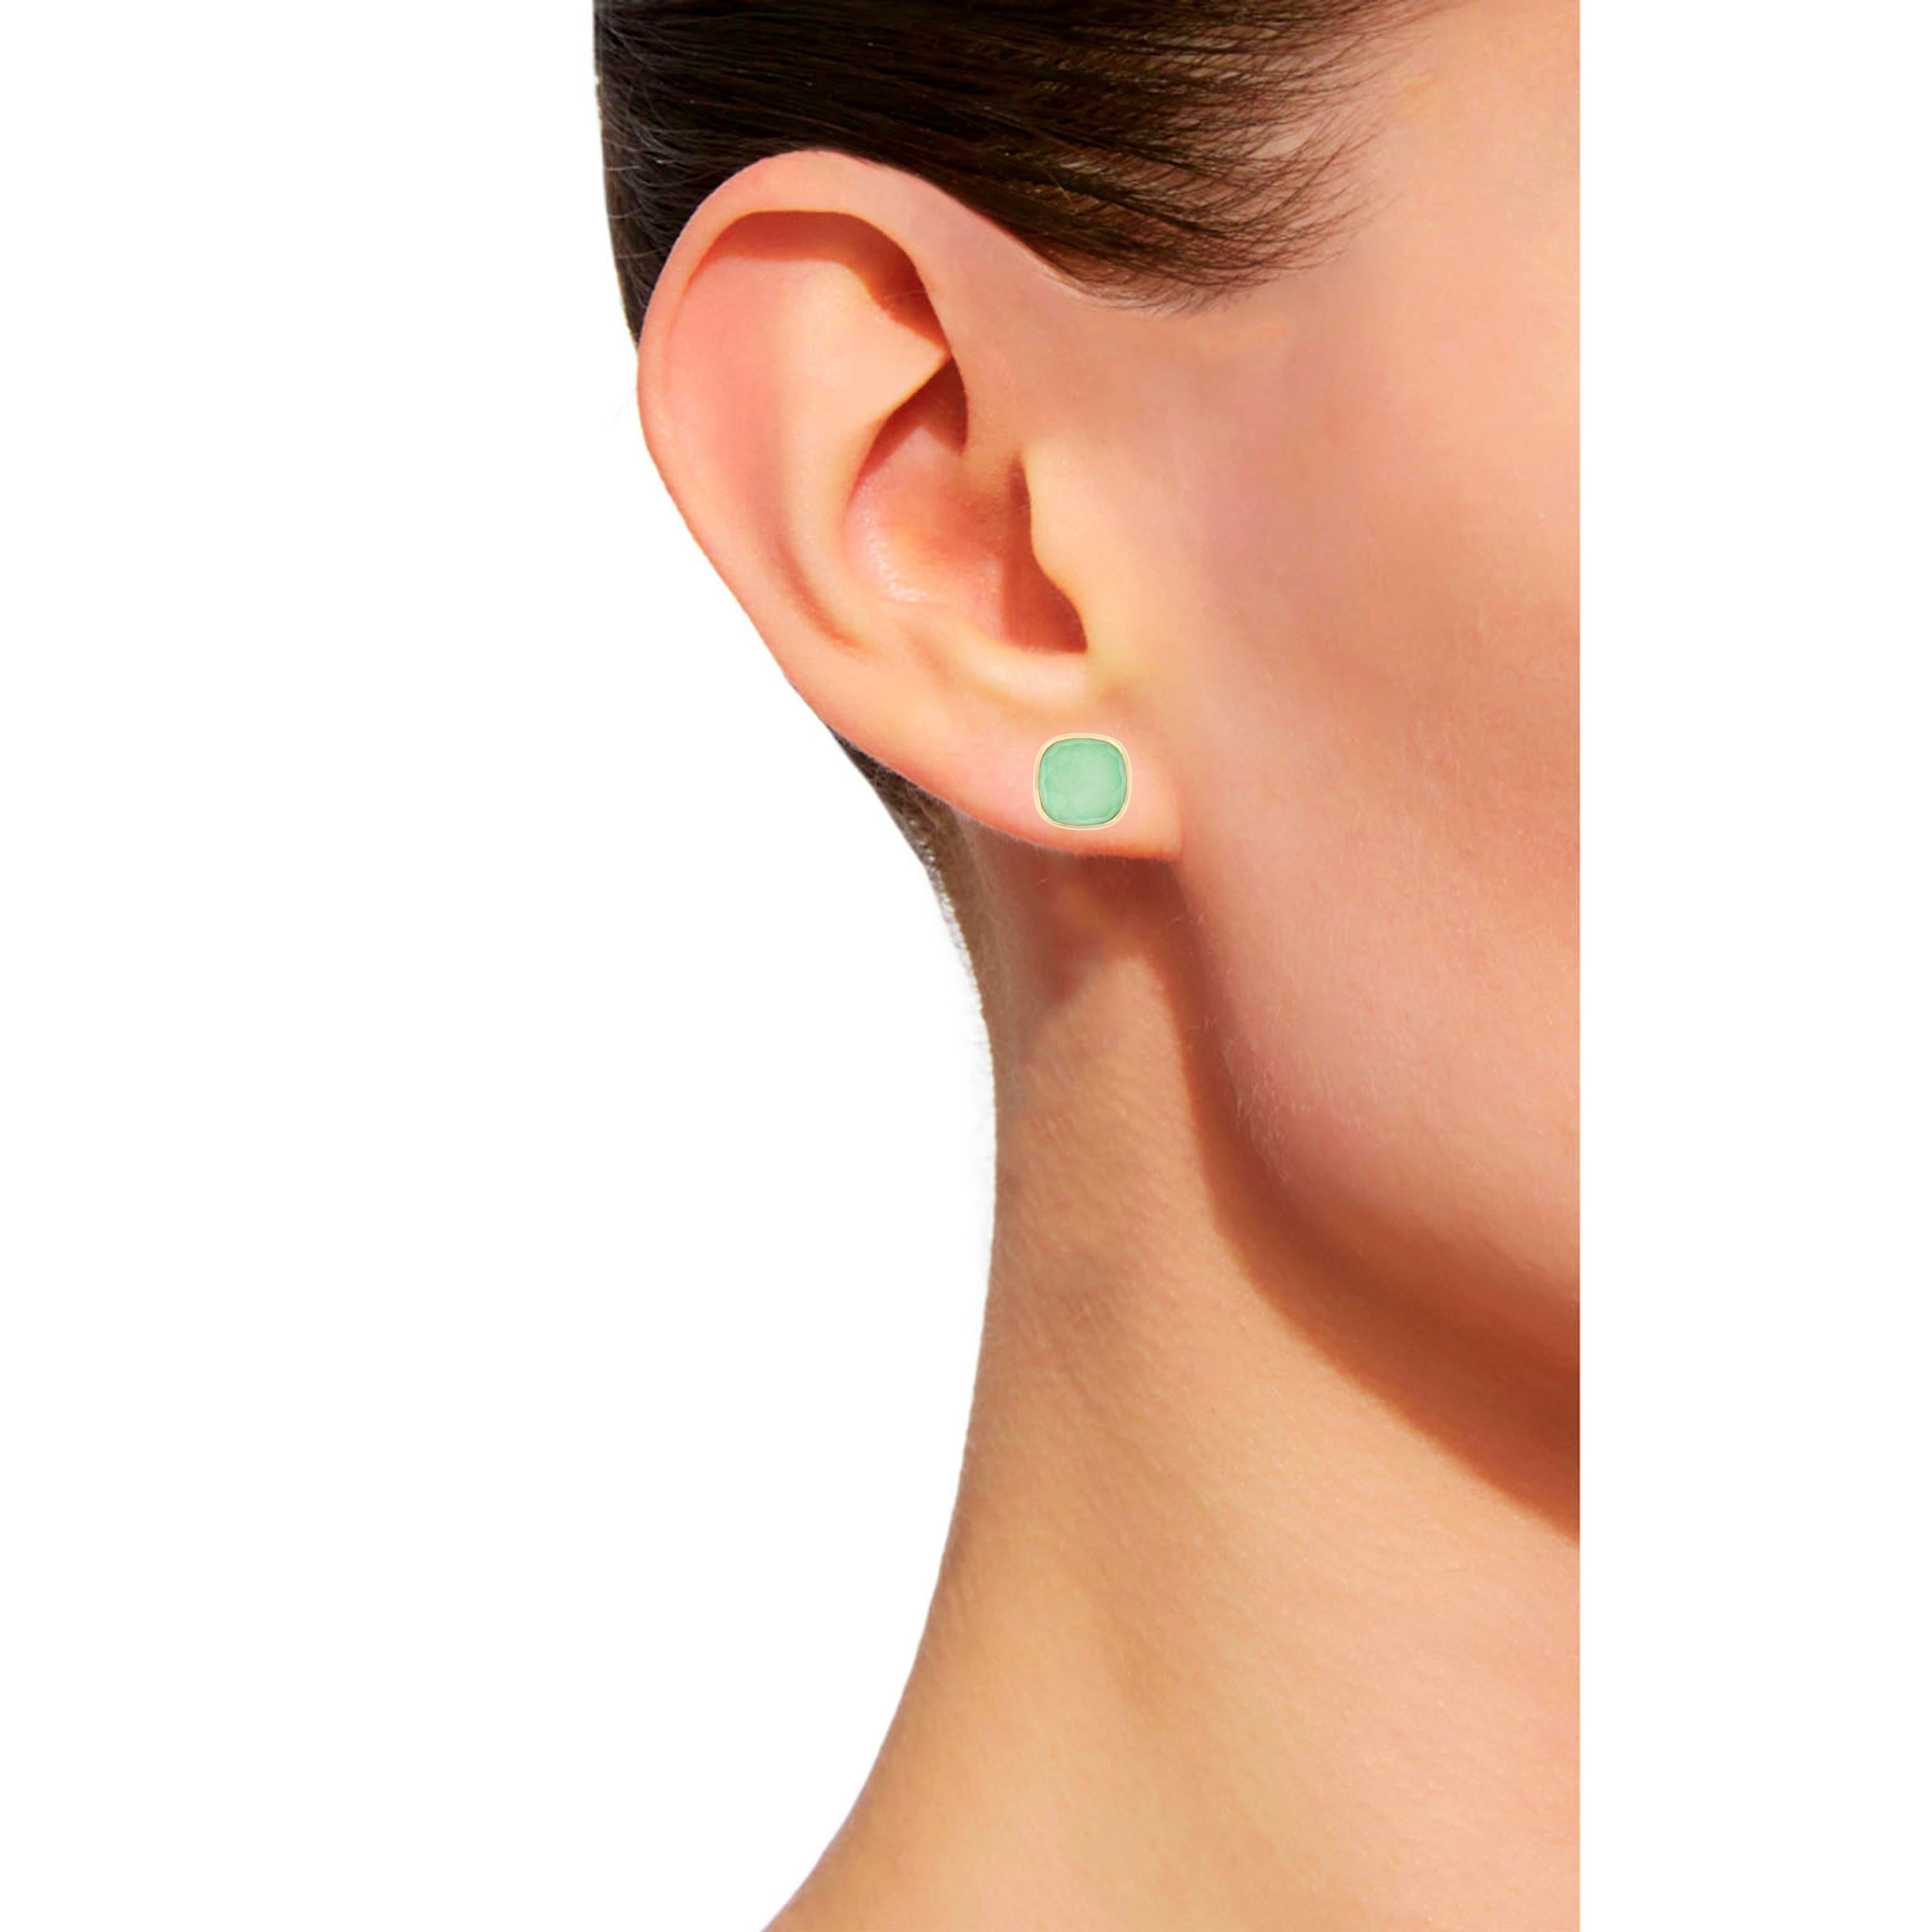 Jona design collection, hand crafted in Italy, 18 karat yellow gold stud earrings set with a crazy cut Quartz over Burmese Jade and Mother of Pearl, weighing 5.6 carats. Clips can be mounted upon request. Dimension: W 0.44 in / 11,19 mm X L 0.44 in